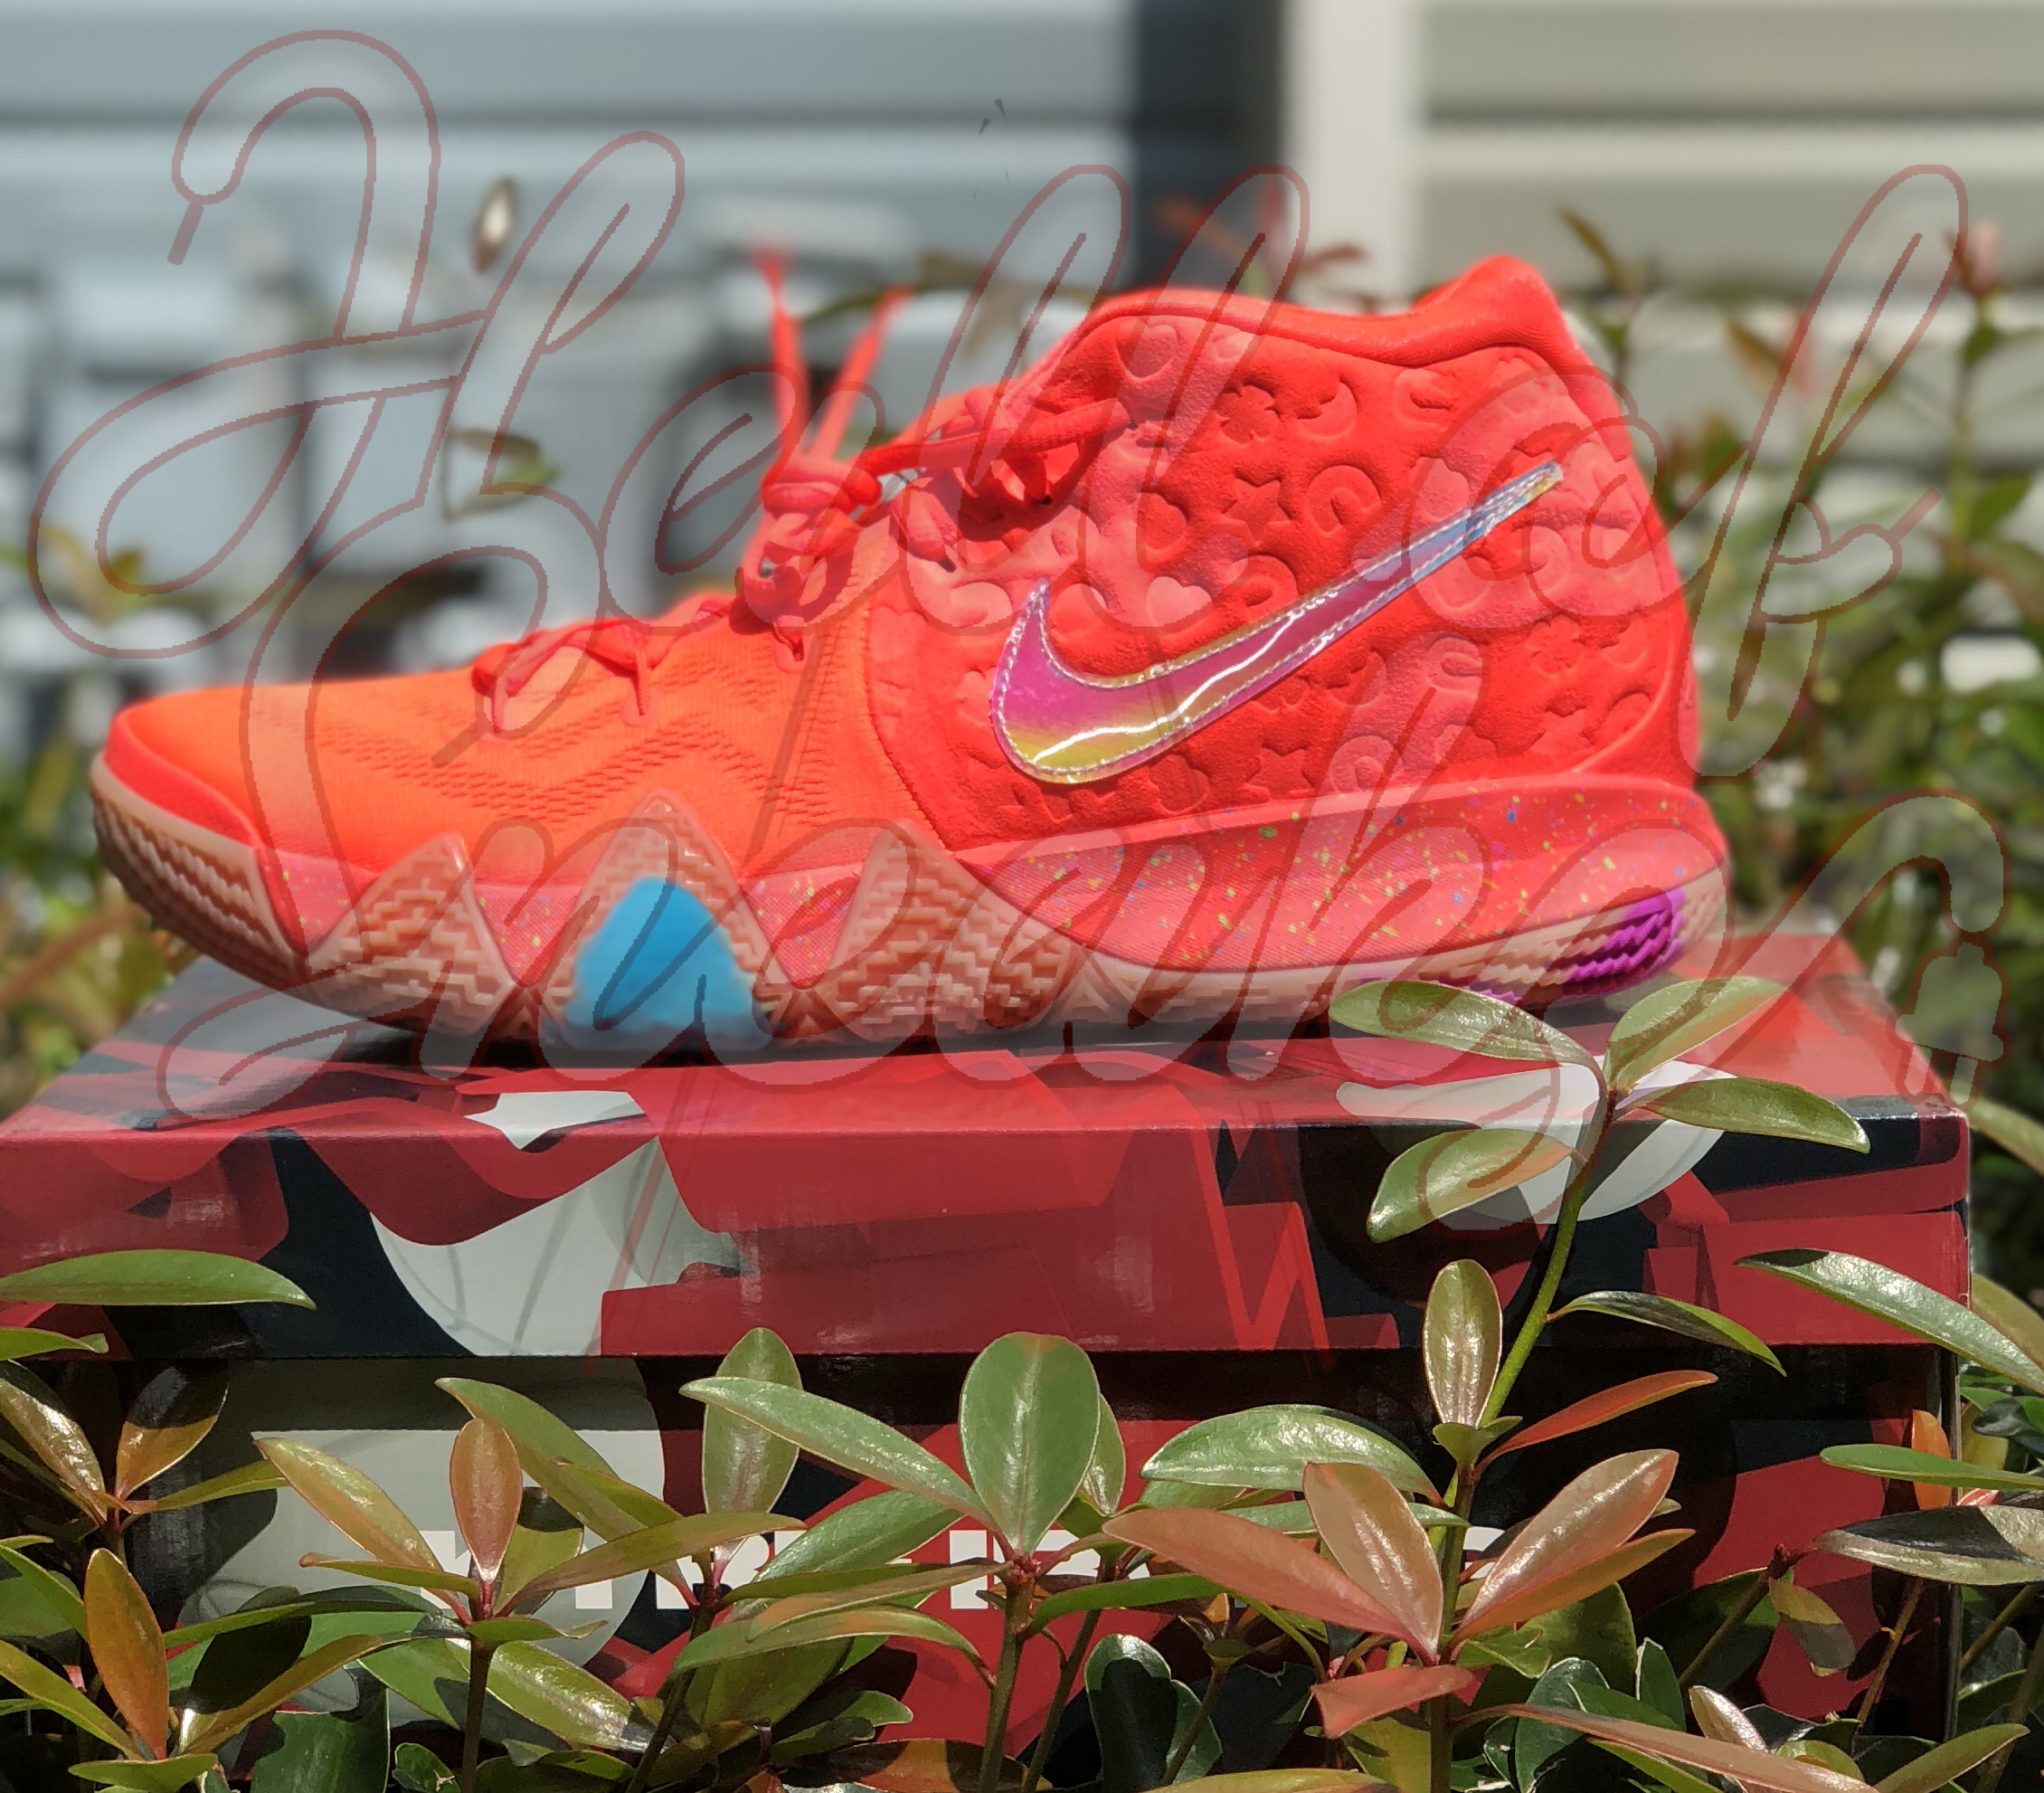 Nike Kyrie 5 Just Do It Sneaker Review YouTube